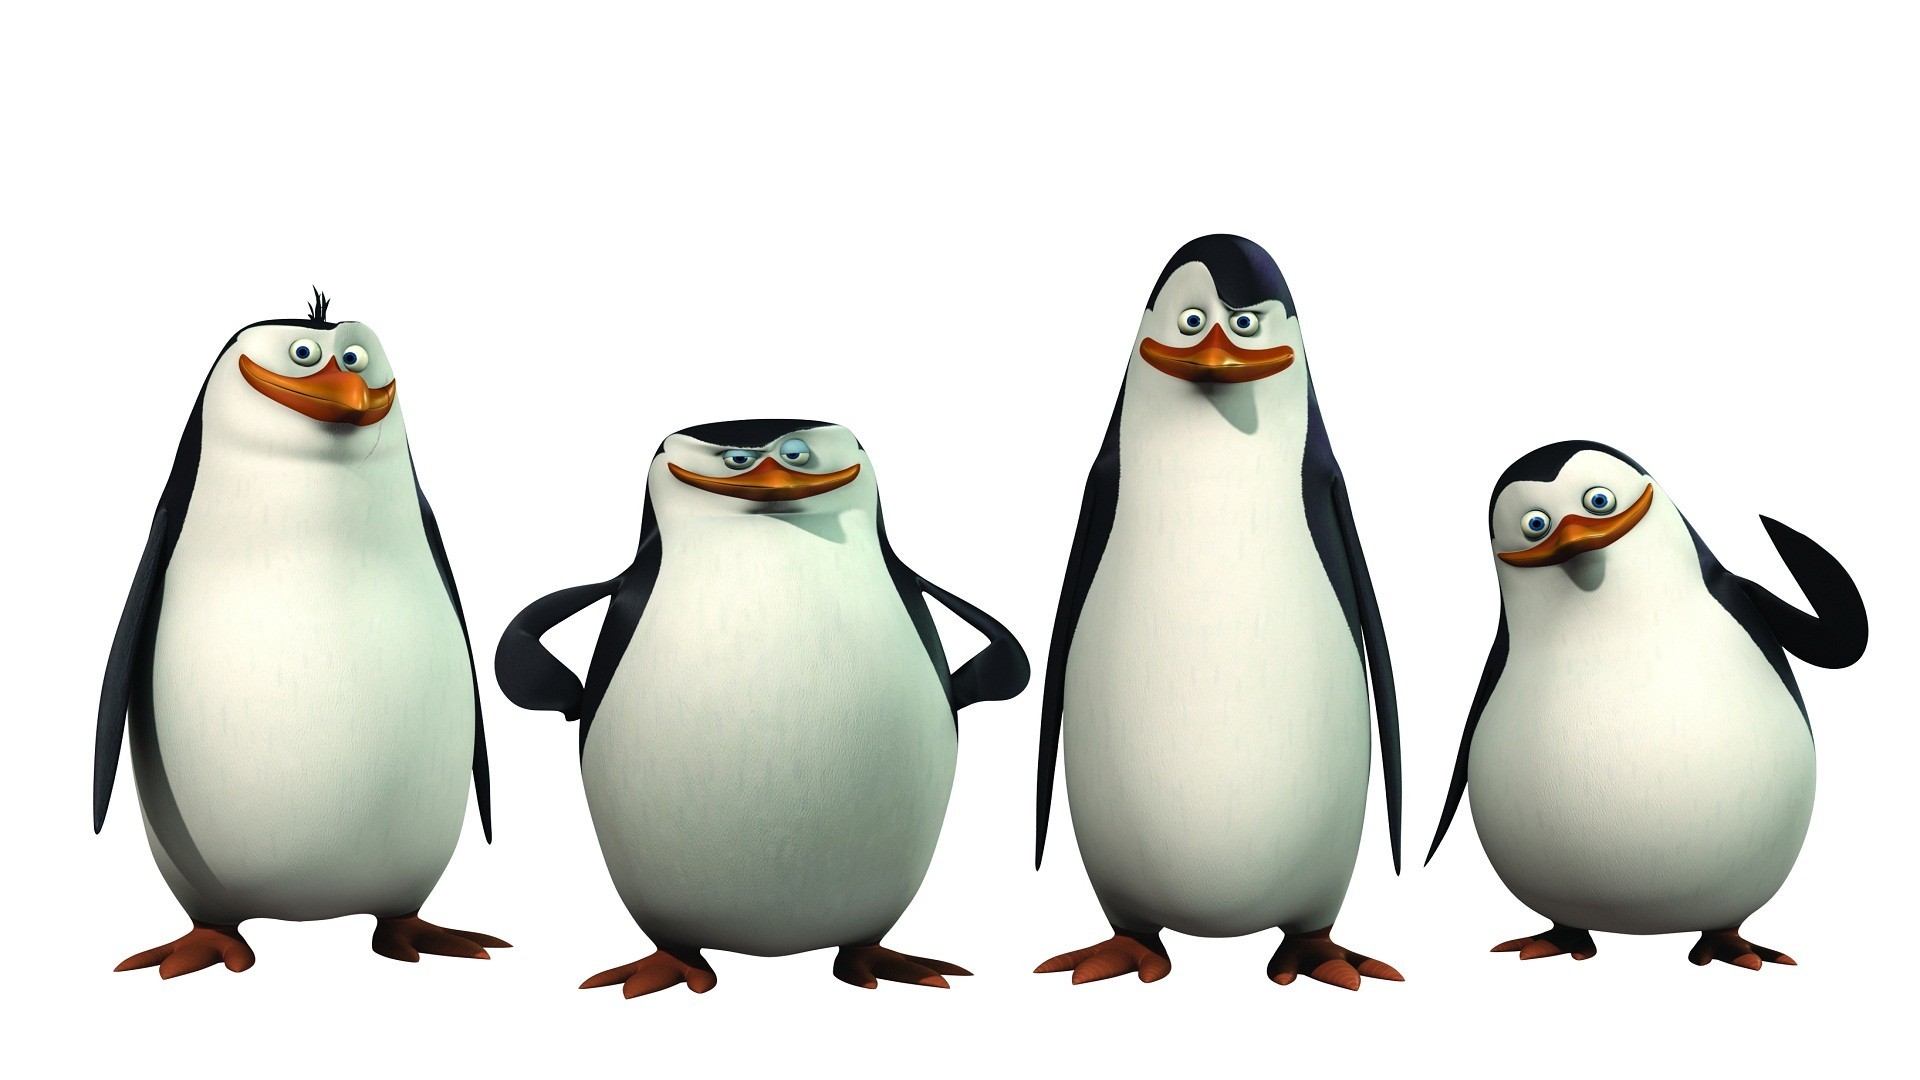 General 1920x1080 Penguins of Madagascar movies animated movies penguins animals simple background white background